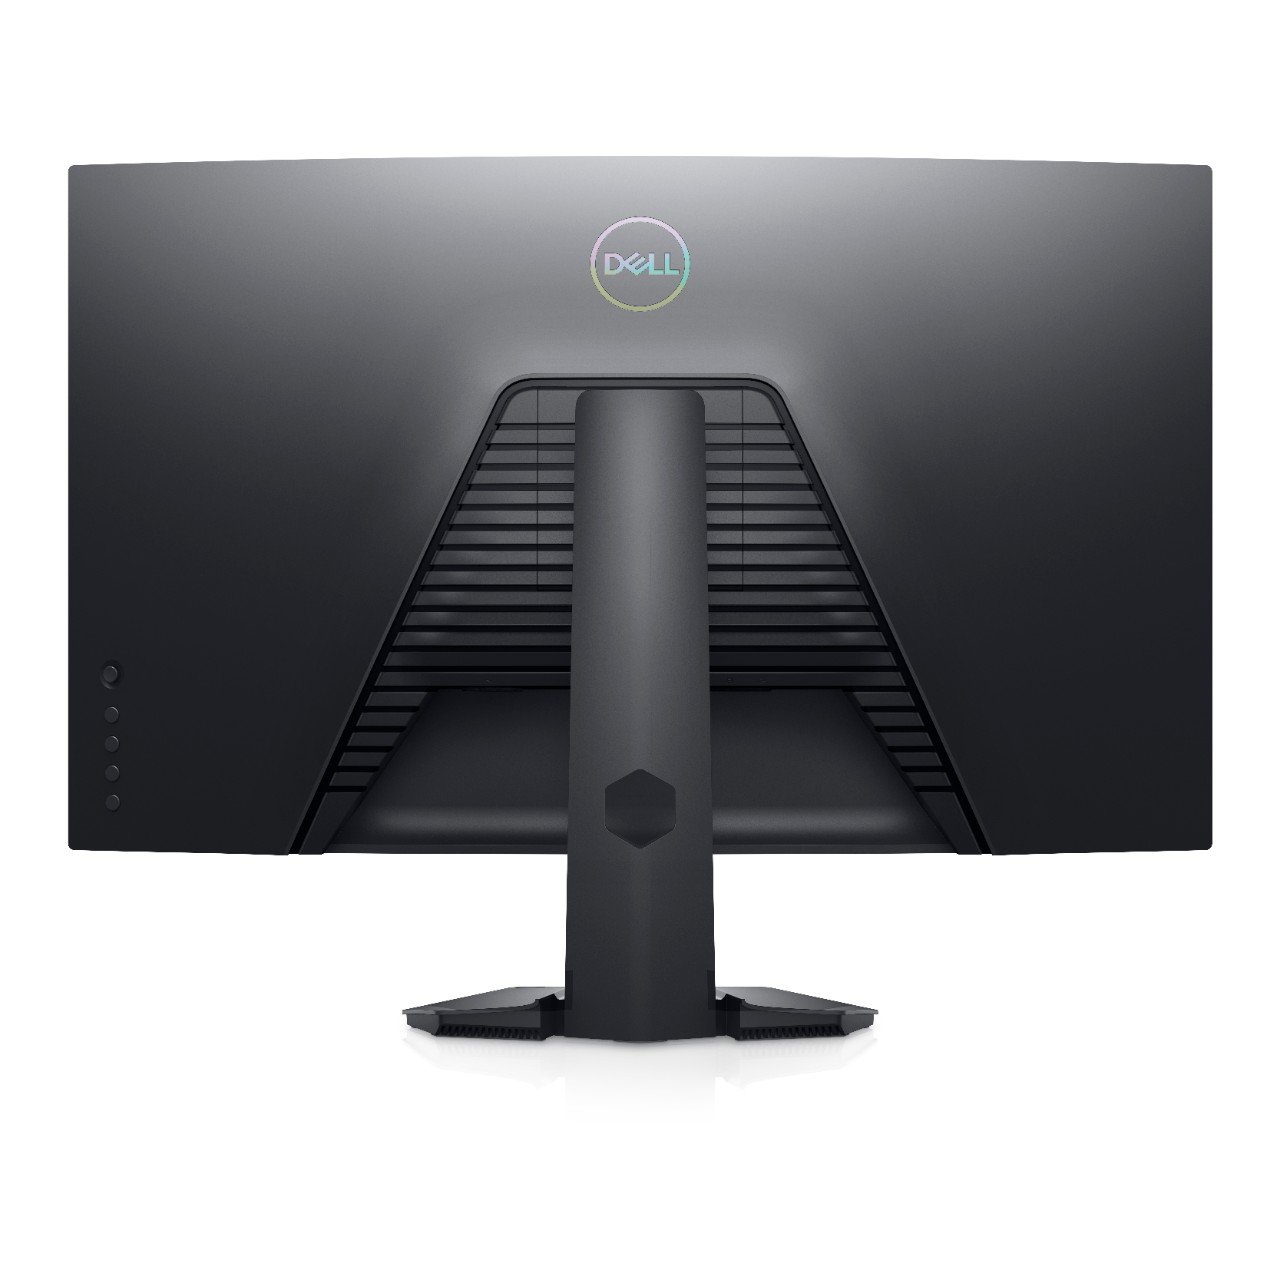 Dell S32 Monitor Back View